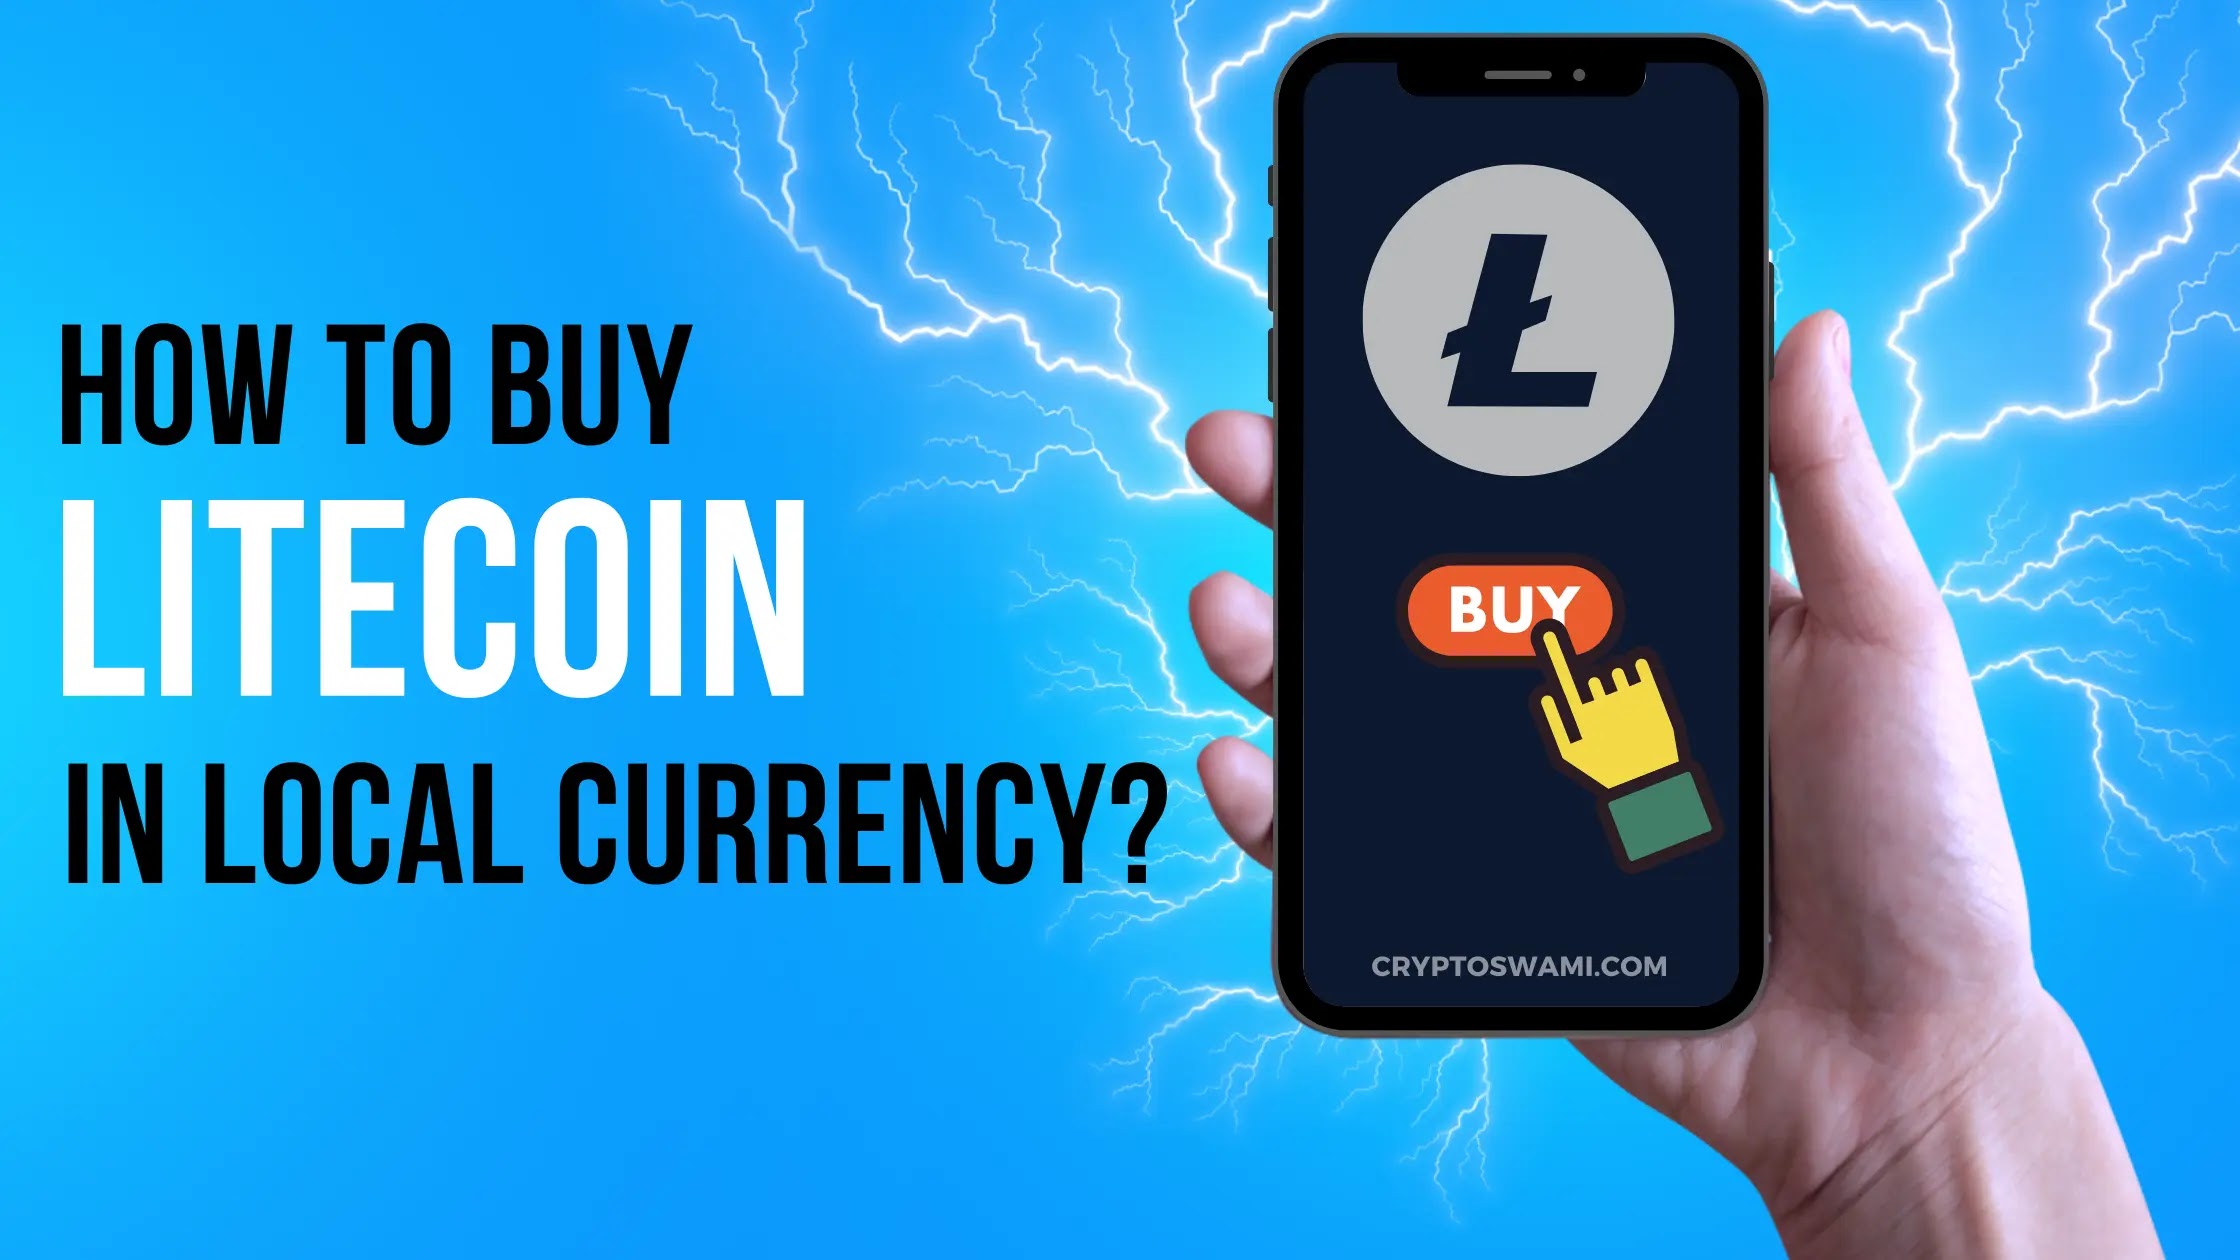 How To Buy Litecoin In Local Currency